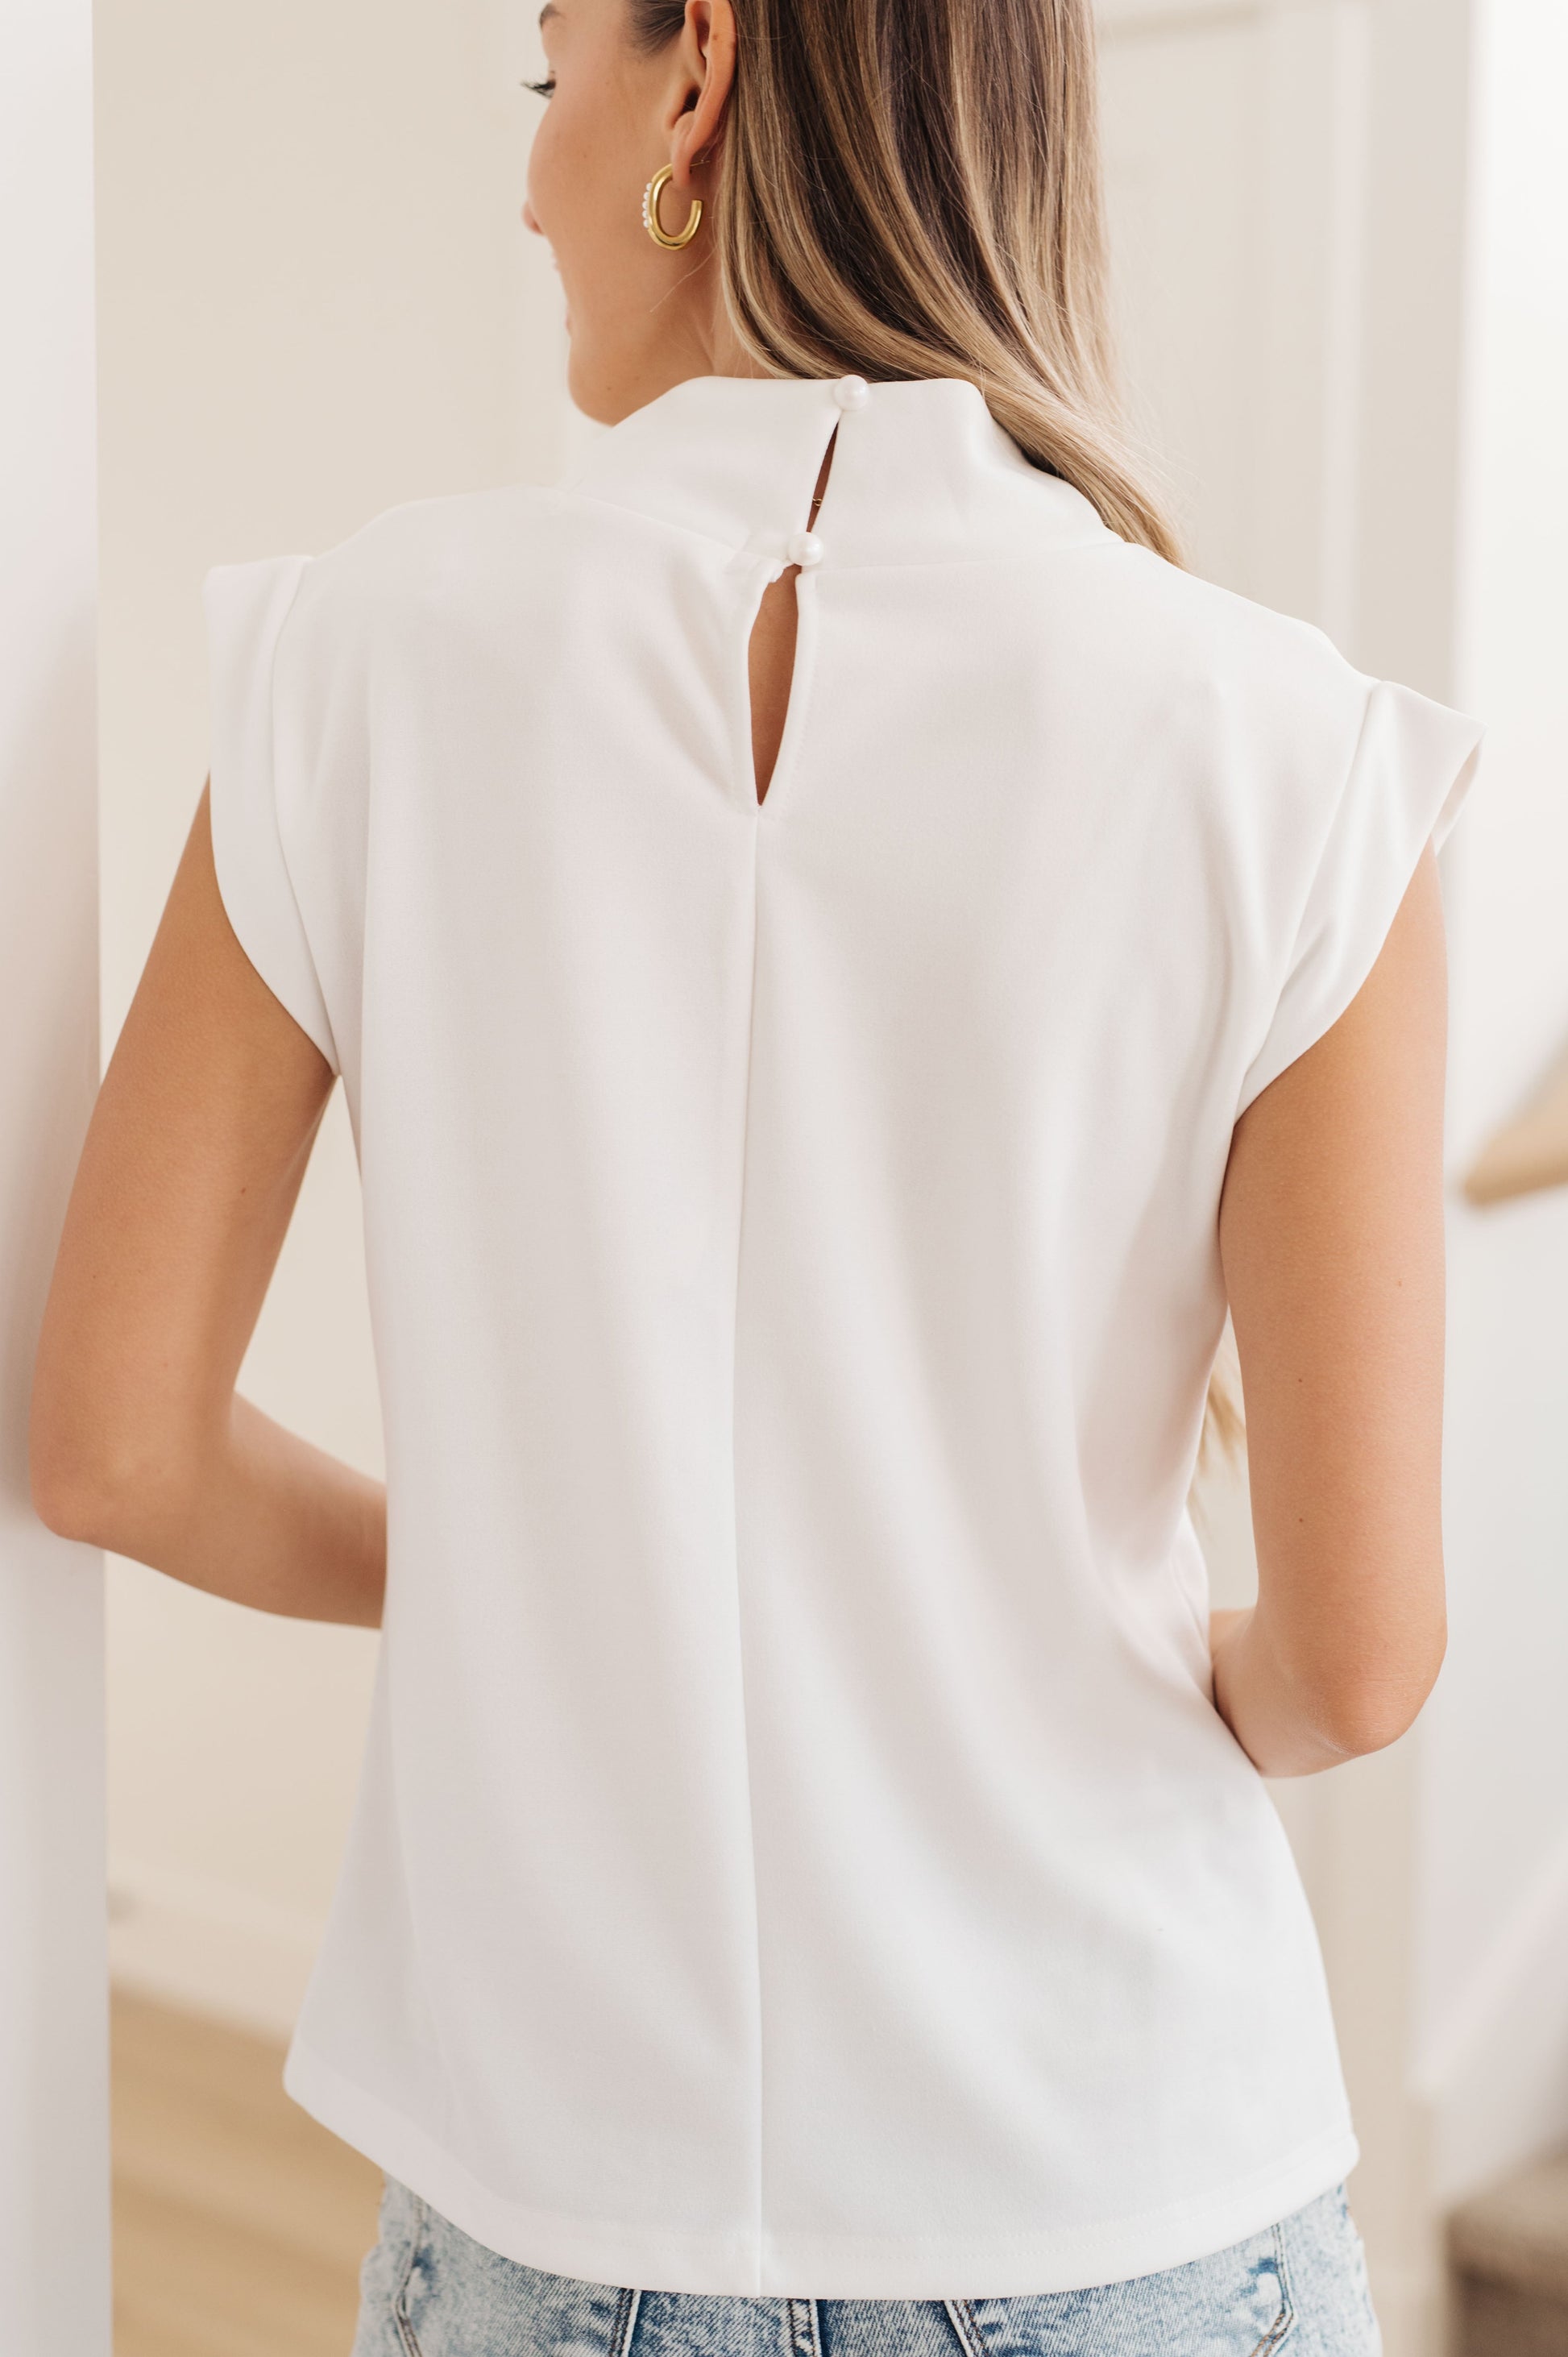 This Overqualified Mock Neck Cap Sleeve Top is a stylish and timeless piece for a modern look. The textured woven fabric and mock neckline provide a dressy, comfortable feel while the banded sleeves add a dash of flair. Dress it up for work or a night out - the possibilities are endless!